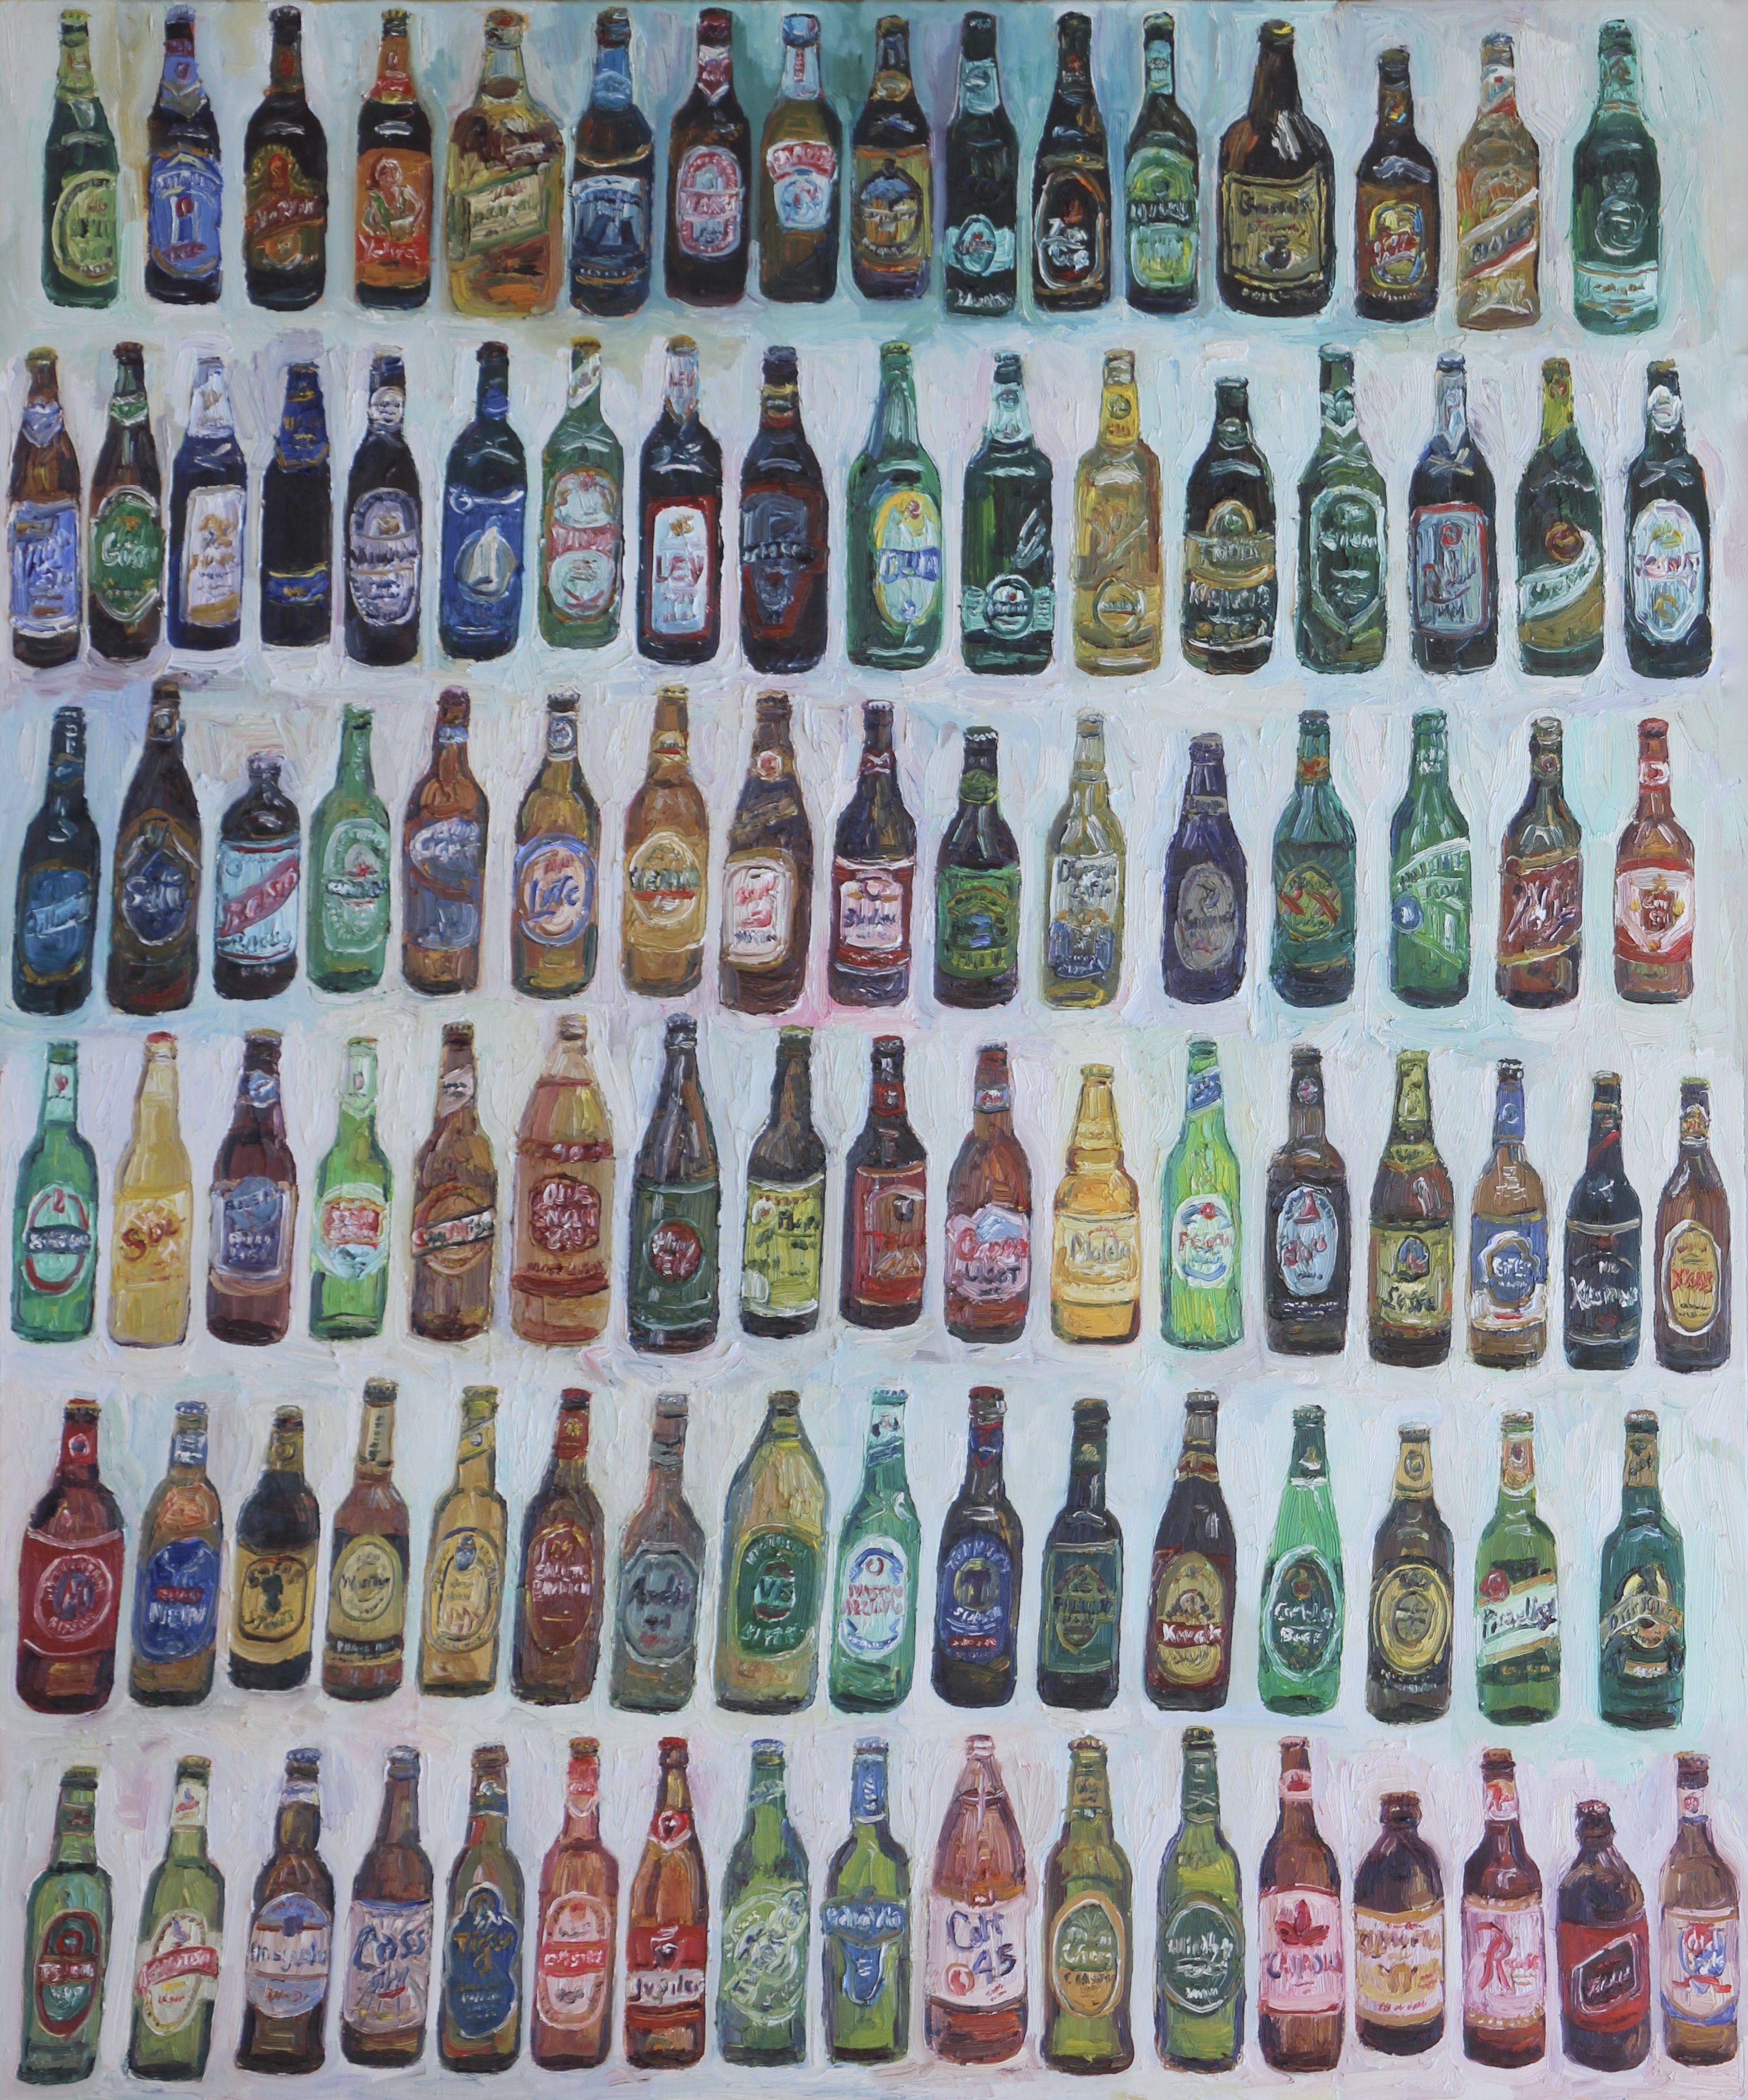 99 bottles of oil on the wall